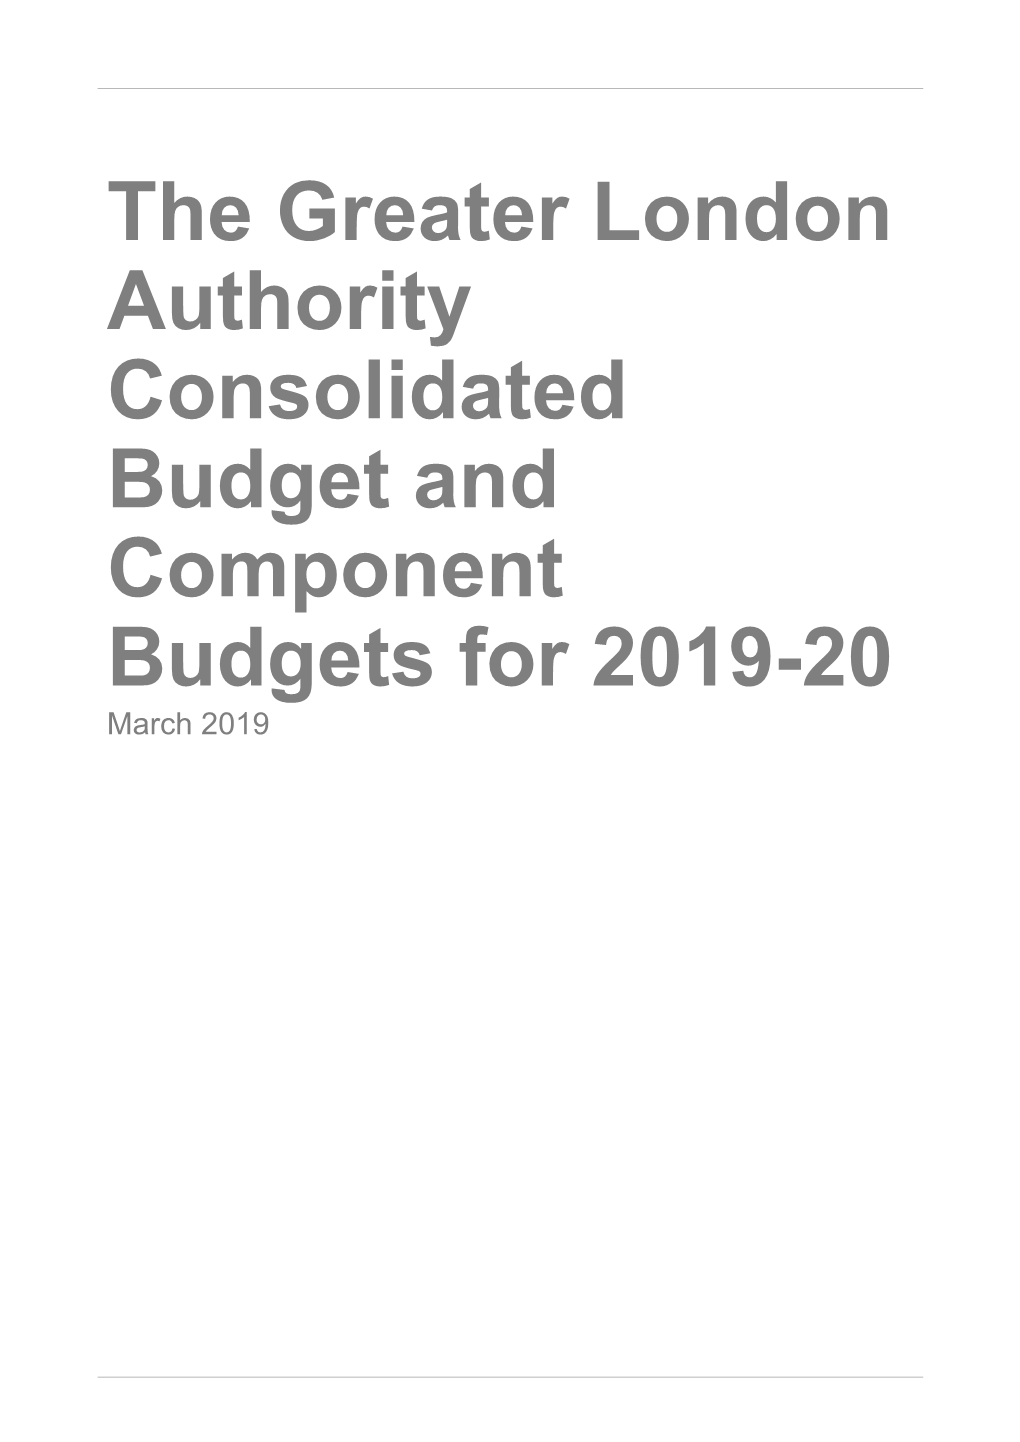 The Greater London Authority Consolidated Budget 2019-20